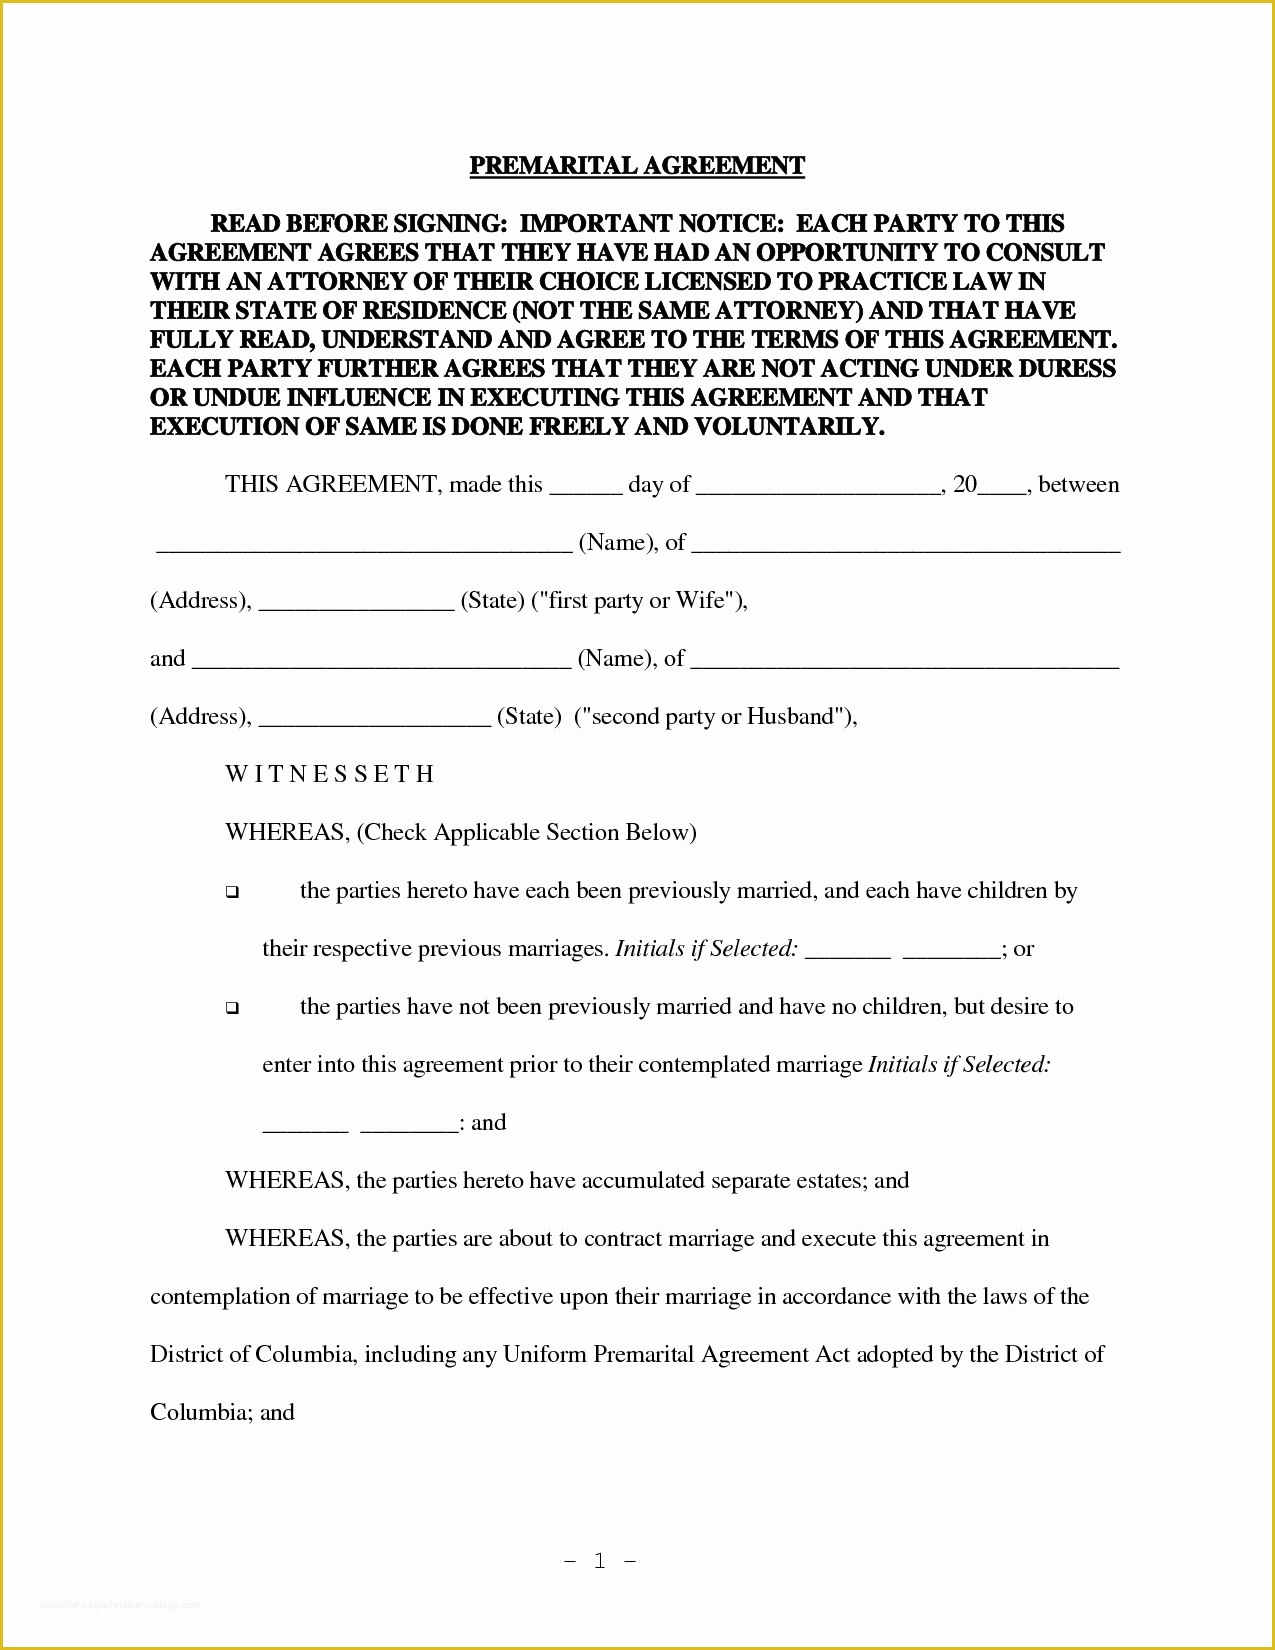 Prenup Template Free Of Prenuptial Agreement form Free 11 Things to Know